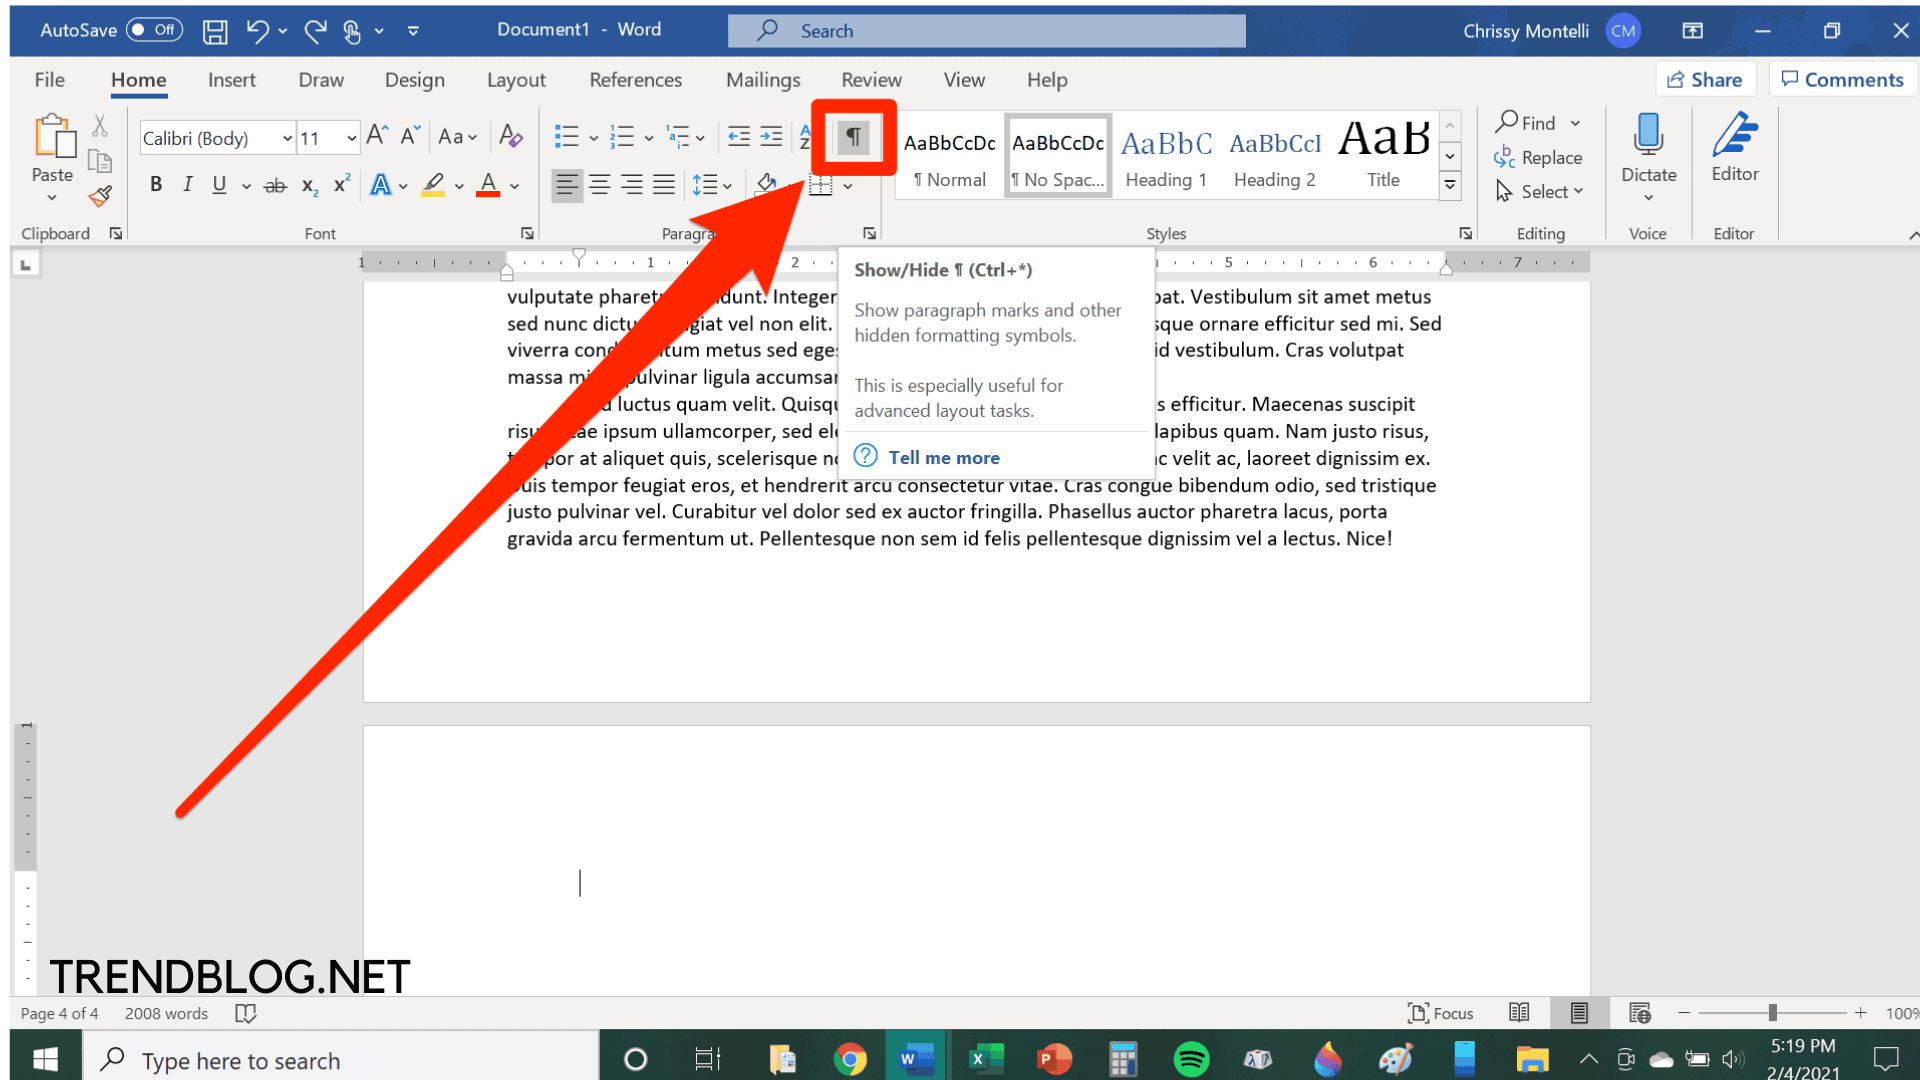 Exclusive and Quick Steps to Remove a Page in Word - Trendblog.net